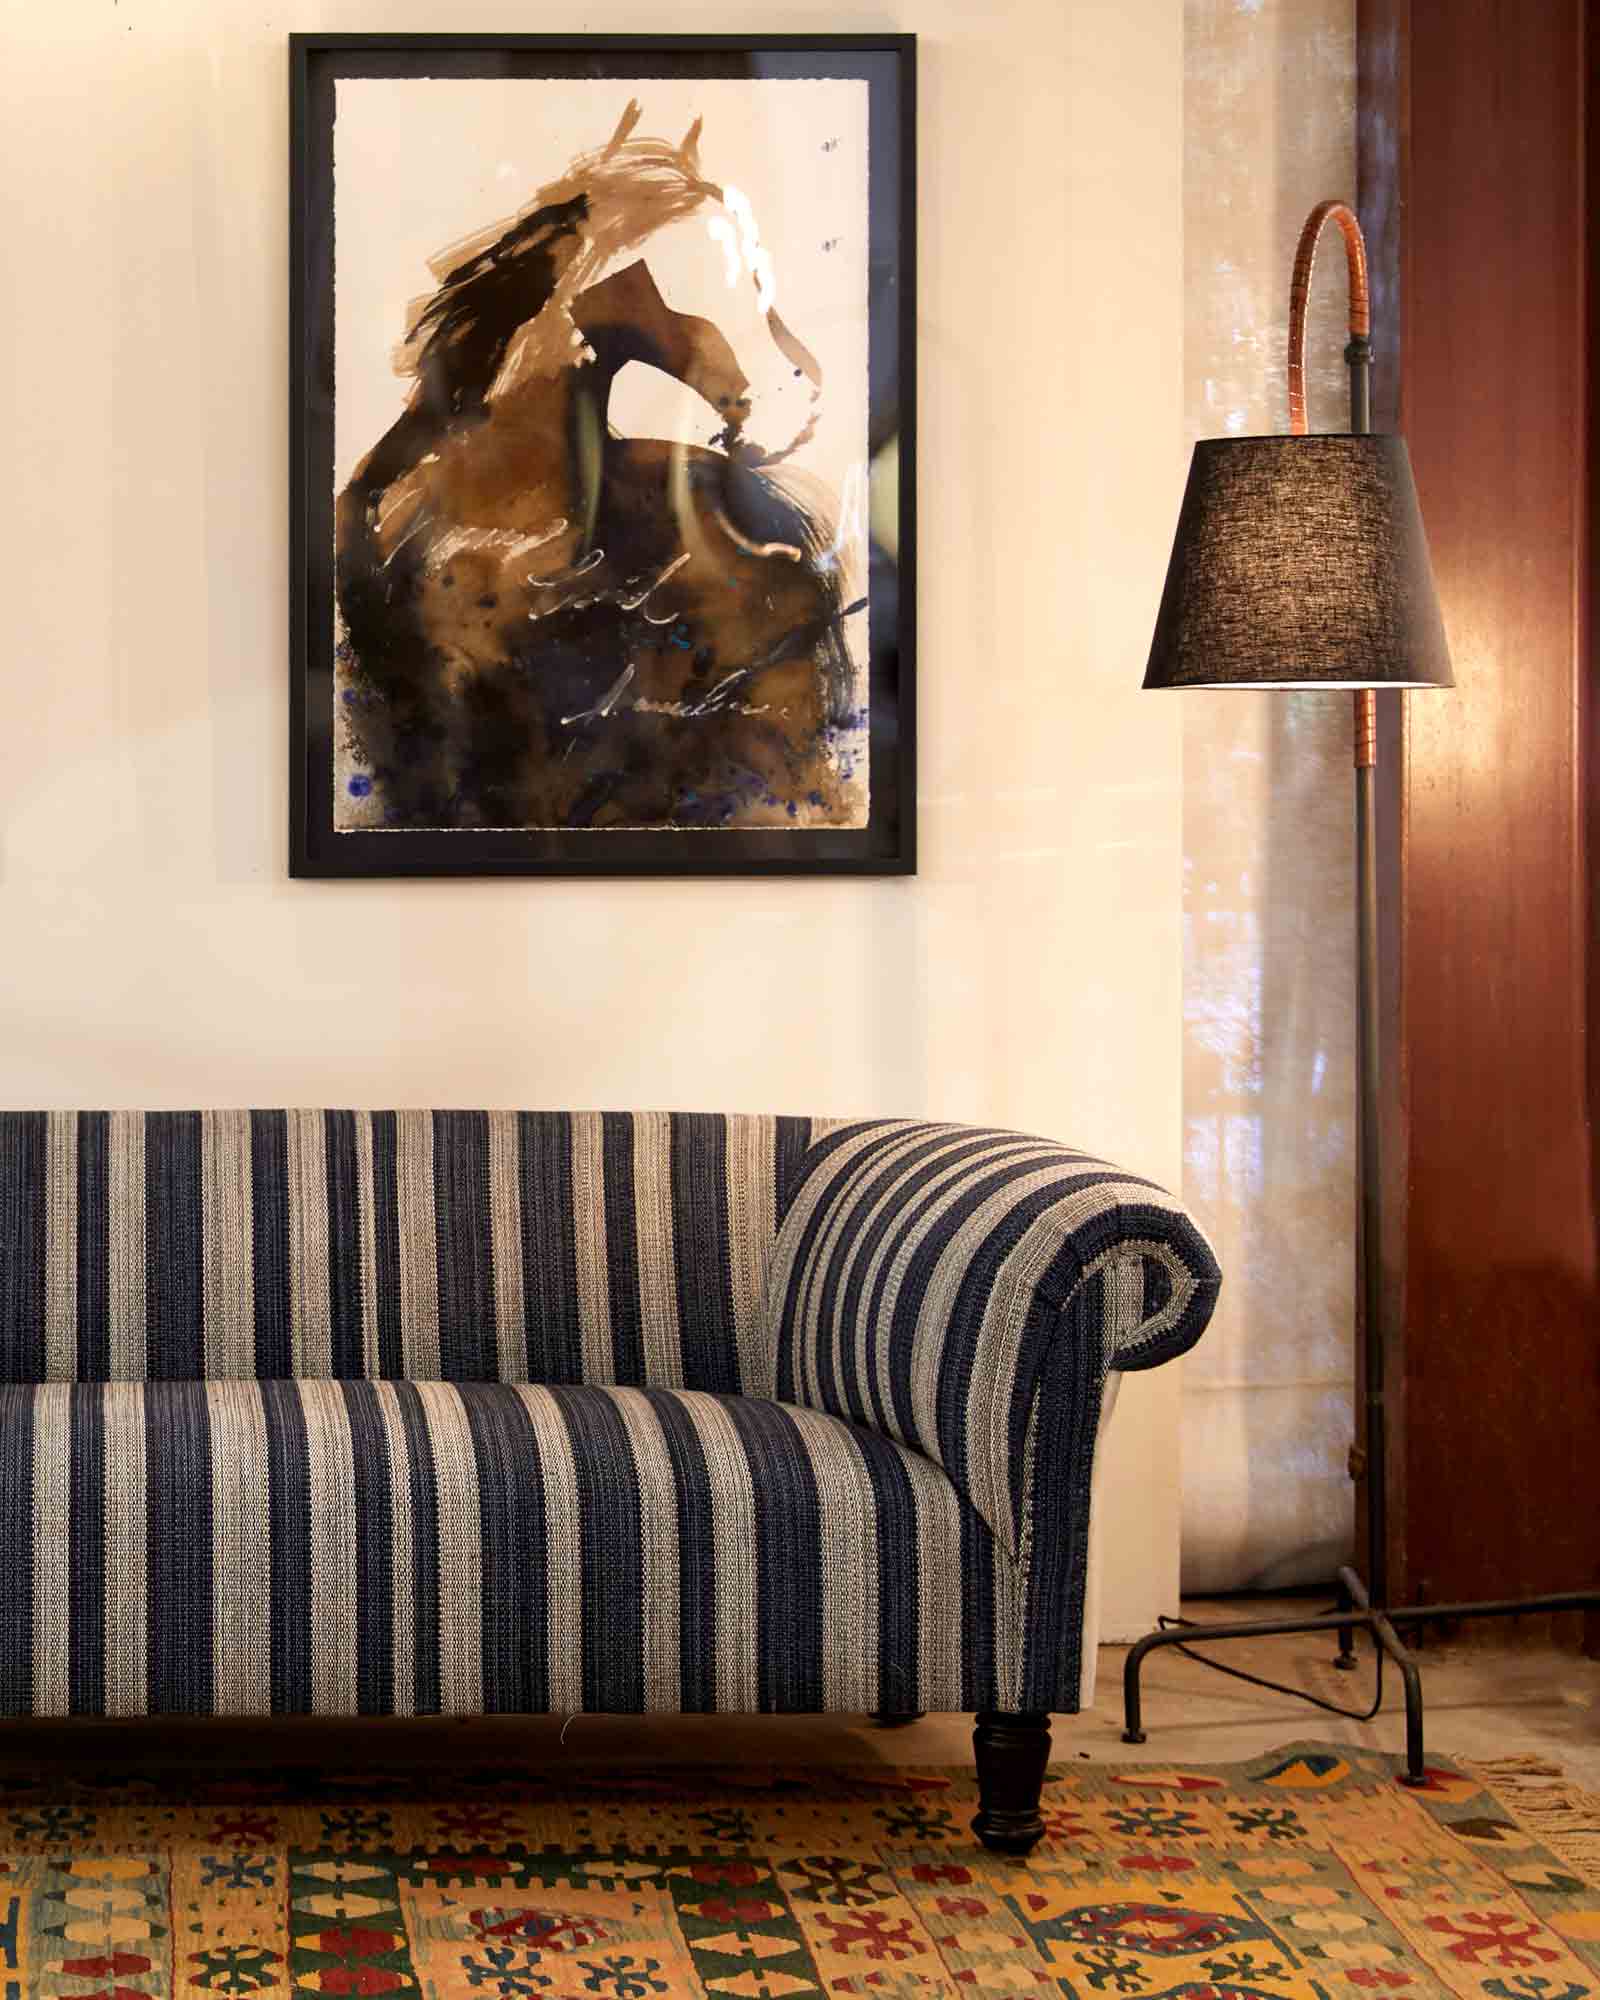  Upholstered sofa in blue and white fabric placed against a white wall with a horse painting hung up. Metal base floor lamp is beside the sofa and has a dark brown lamp shade.  